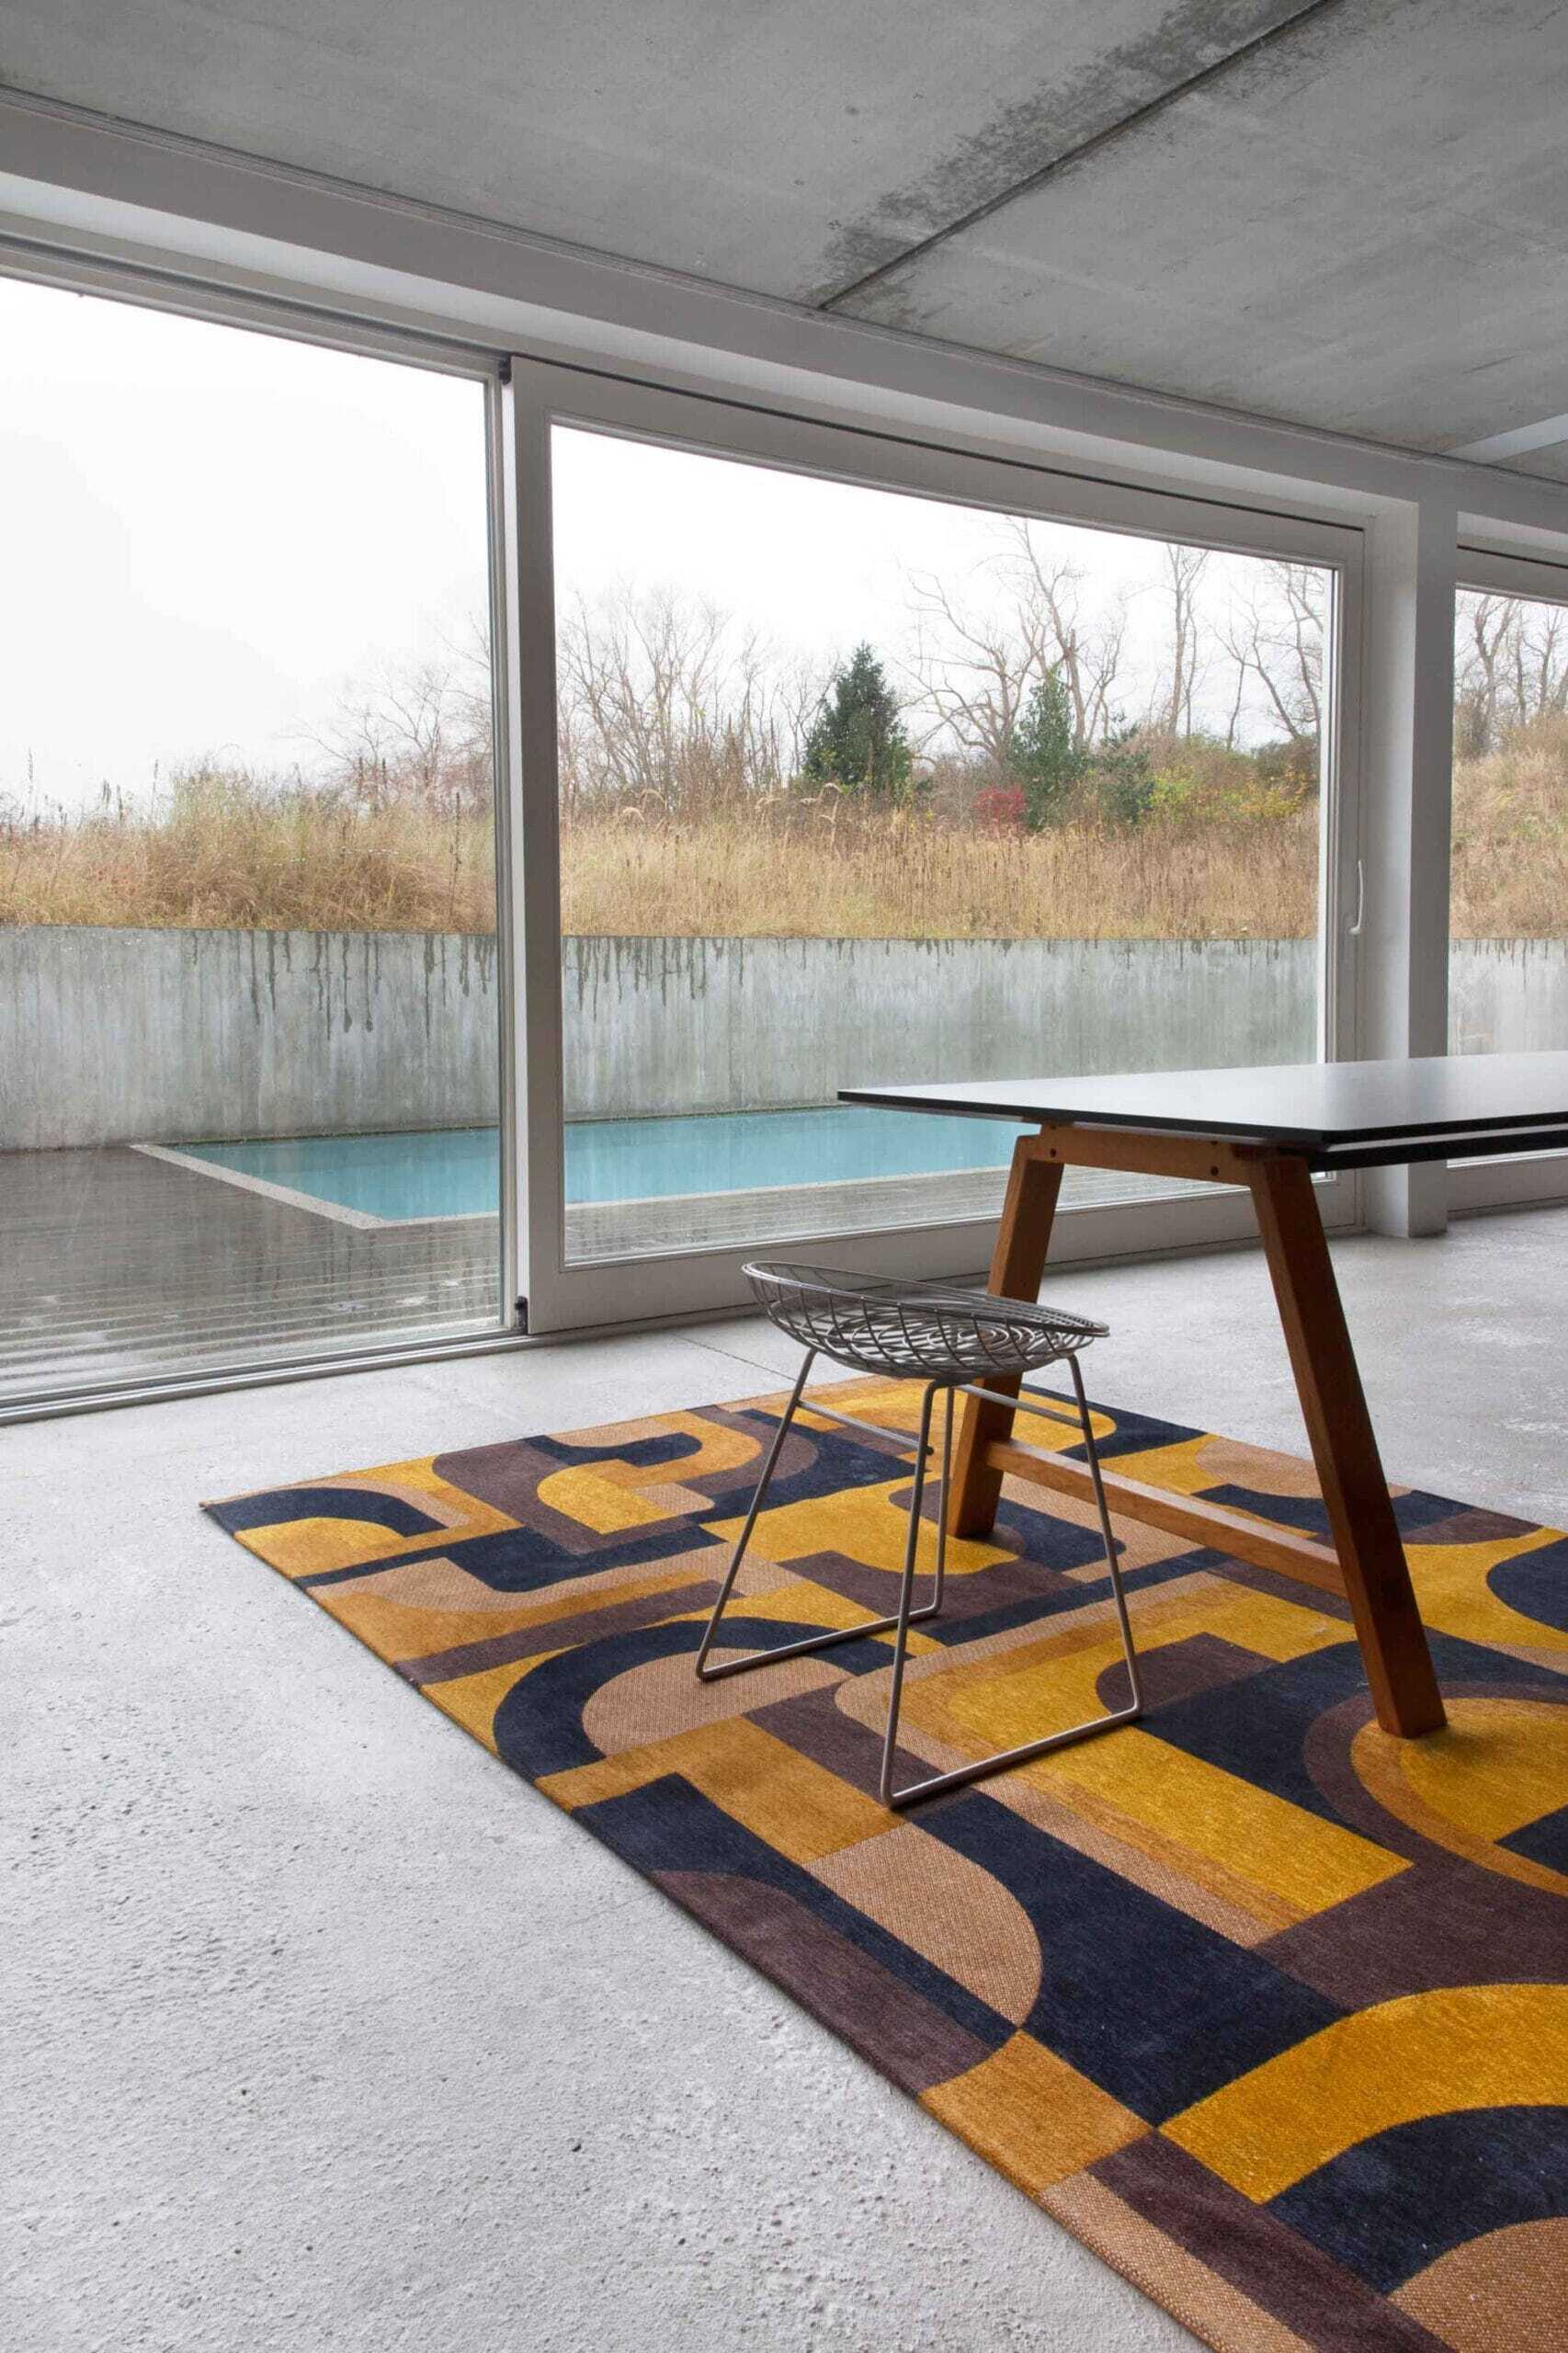 Module Collection Nuance Yellow Meyer 9210 rug by Louis De Poortere